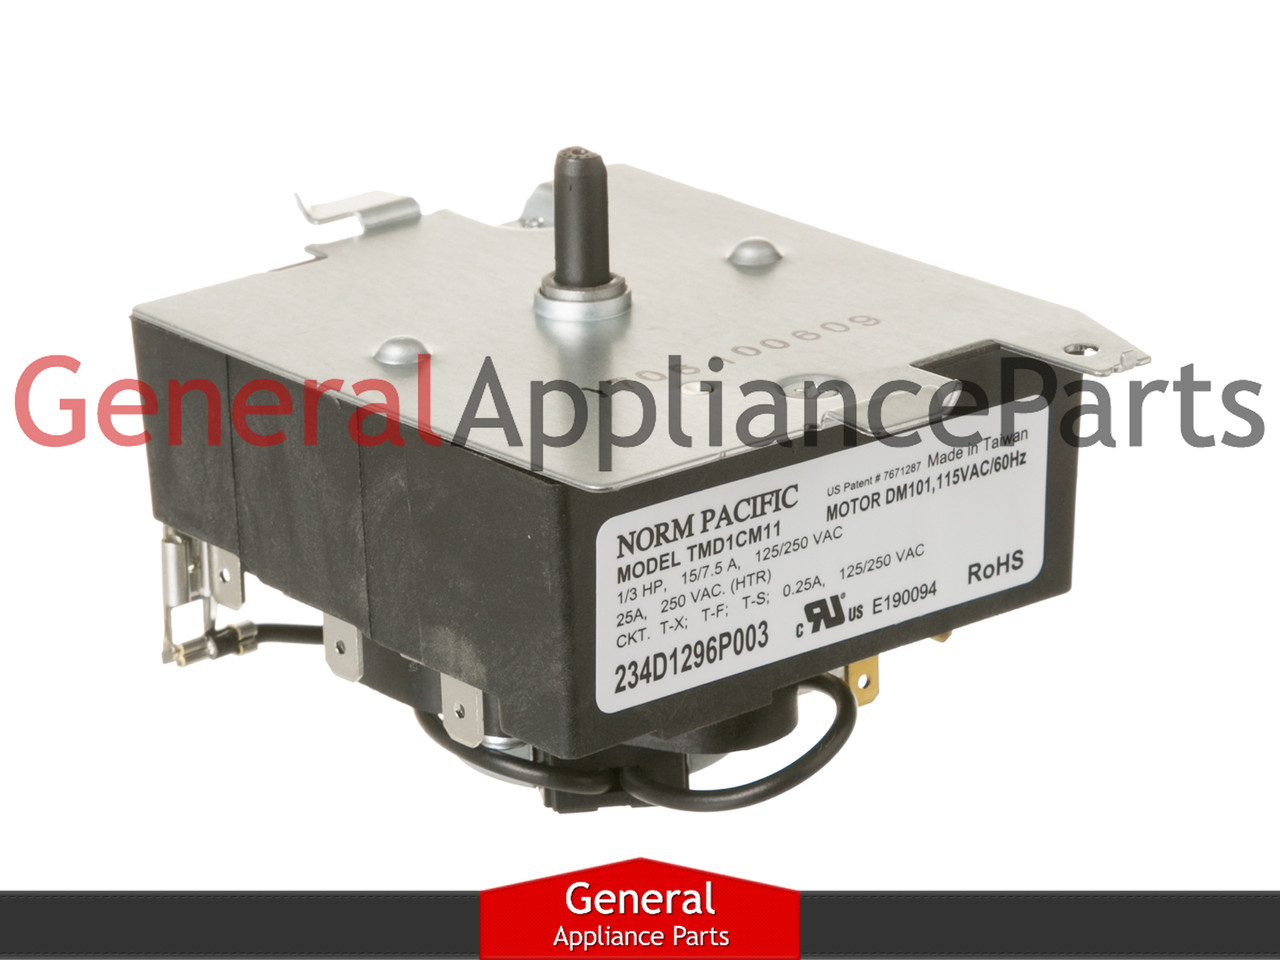 OEM Dryer Timer Control replaces GE General Electric # TMD1CM11 - General Appliance  Parts